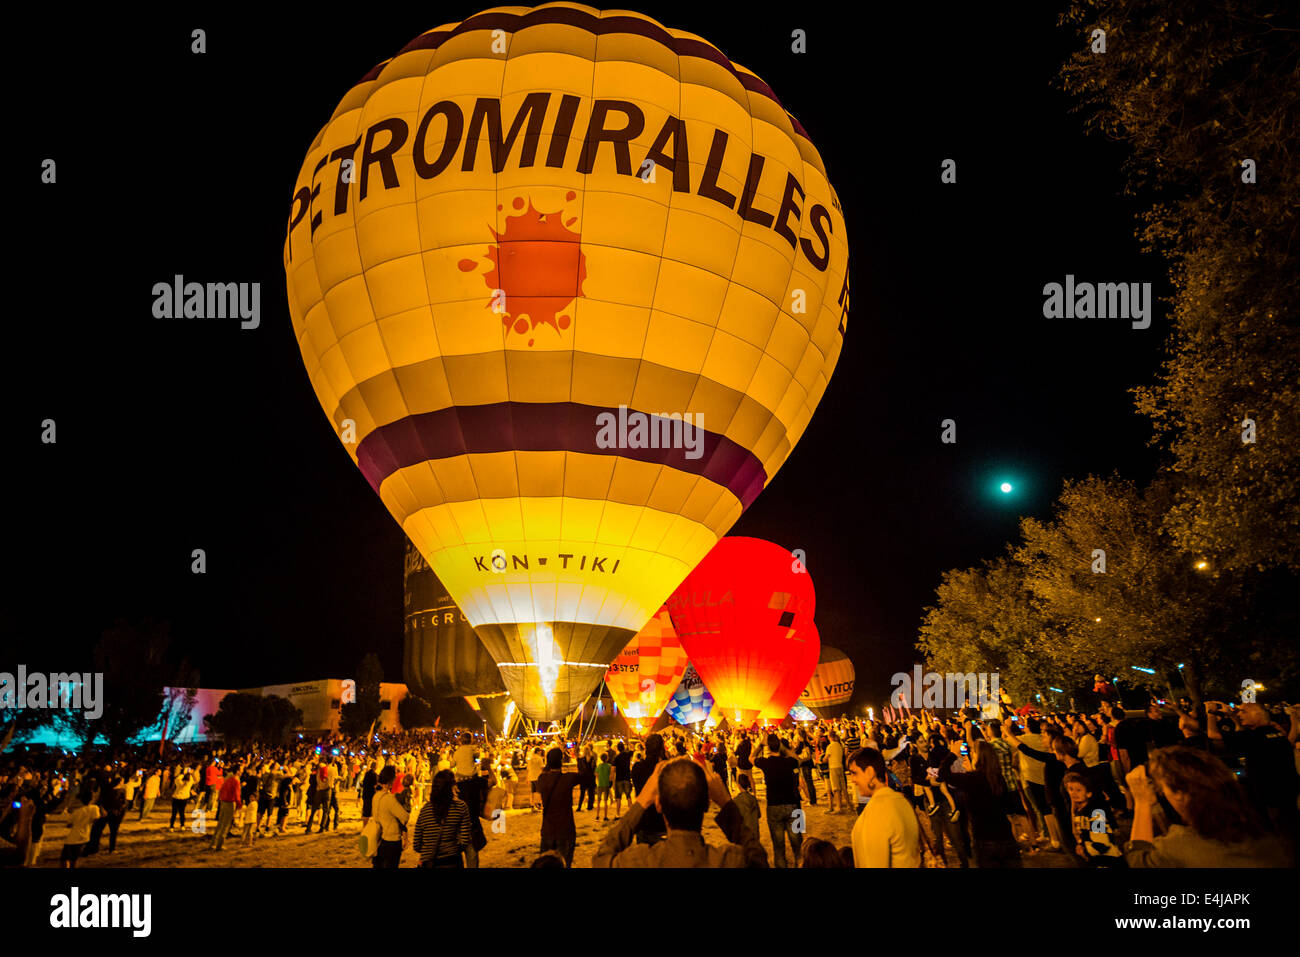 Barcelona, Catalonia, Spain. 12th July, 2014. Thousands enjoy the glowing Hot air balloons in the night of Igualada as they are lit up during the Glow Night event at the European Balloon Festival. Credit:  Matthias Oesterle/ZUMA Wire/ZUMAPRESS.com/Alamy Live News Stock Photo